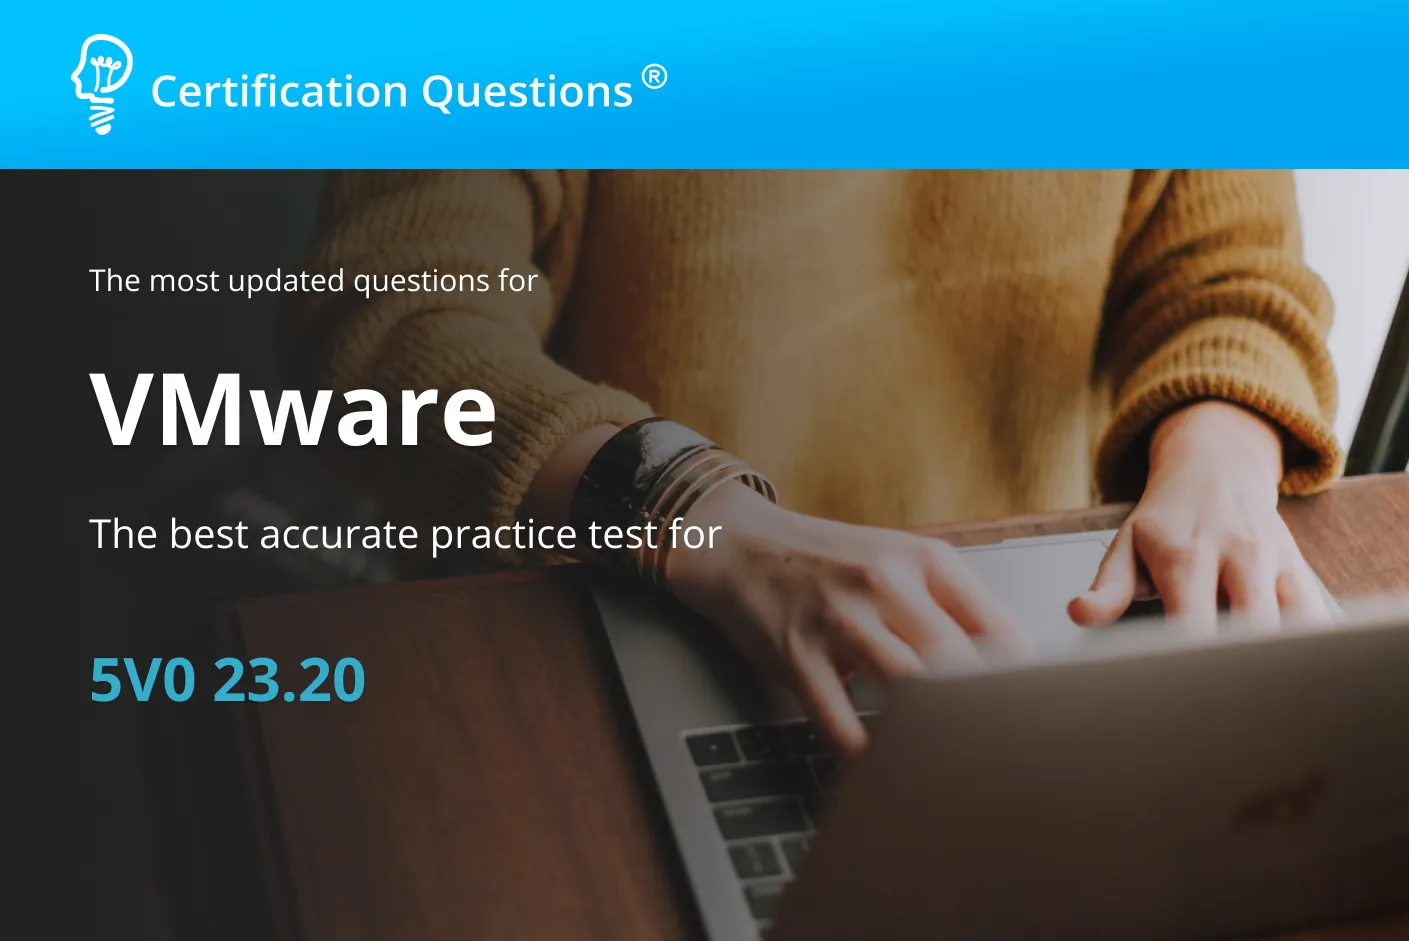 This image represents the VMware Vsphere Exam Questions